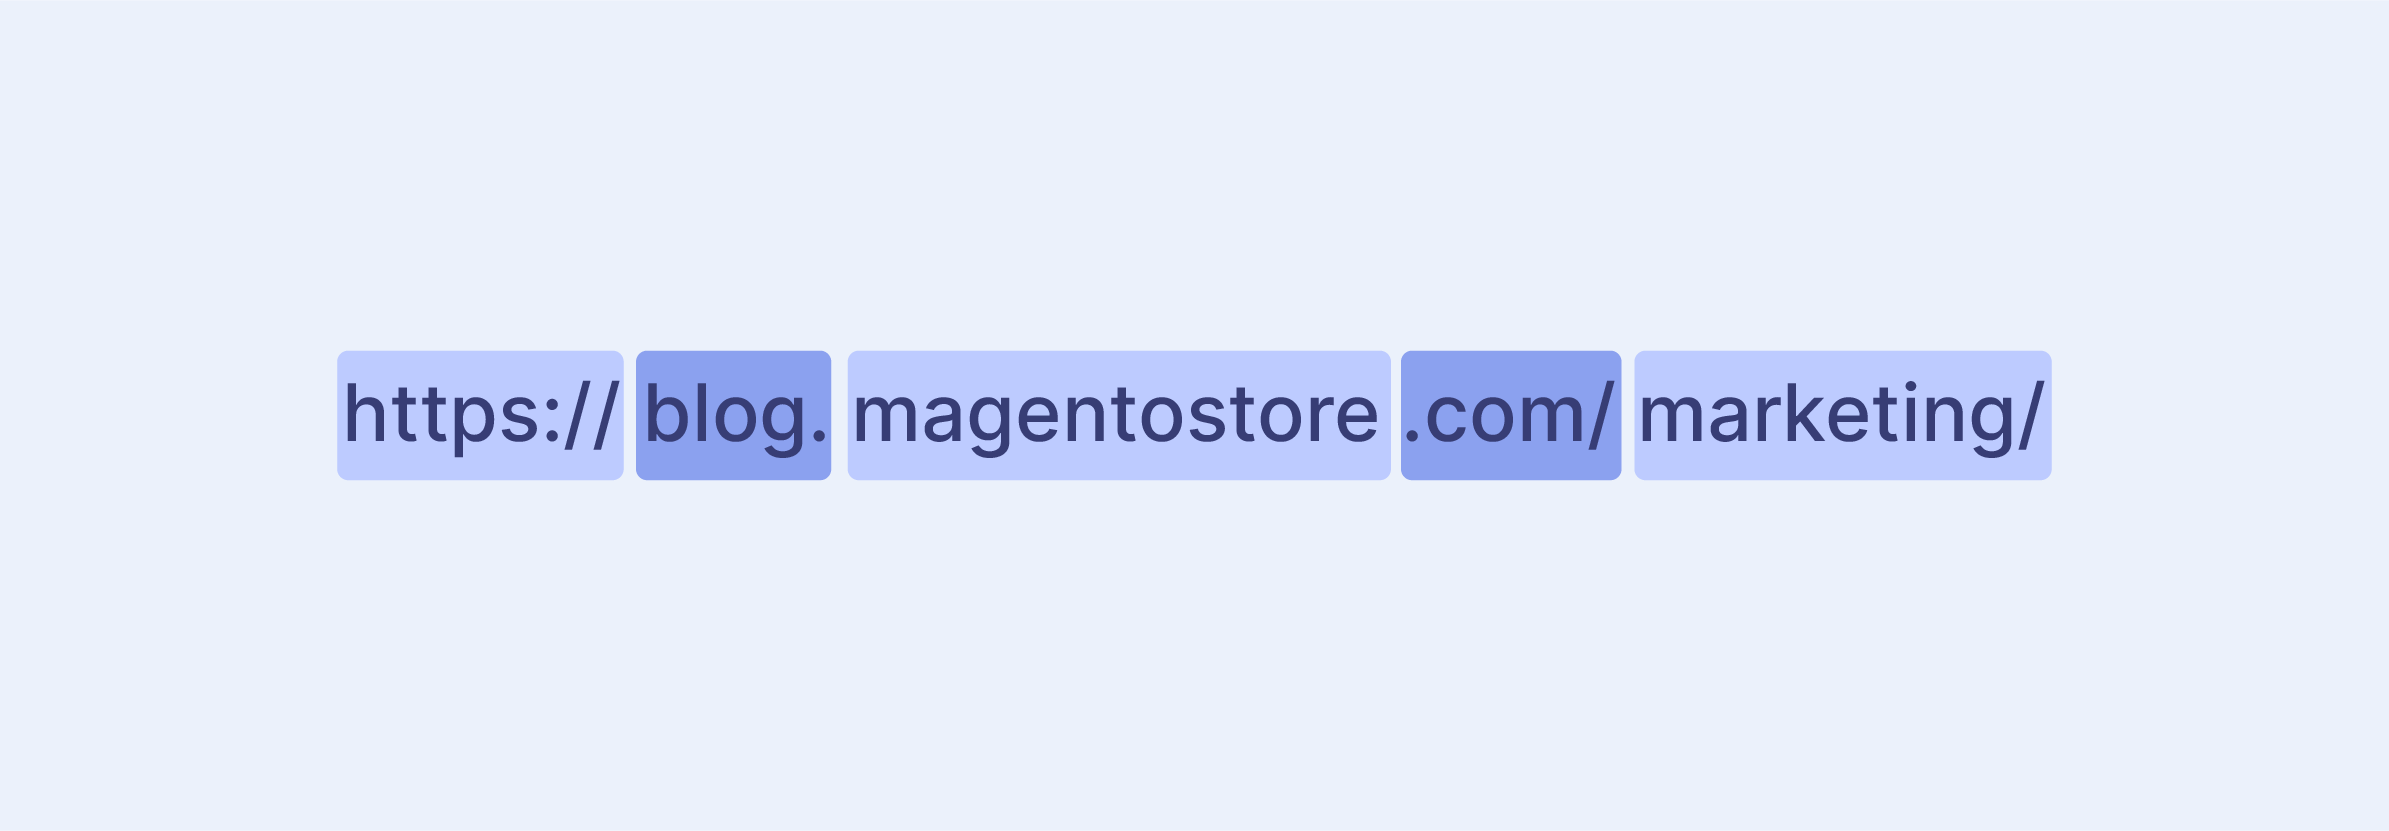 Enhanced URL structures for better Magento SEO